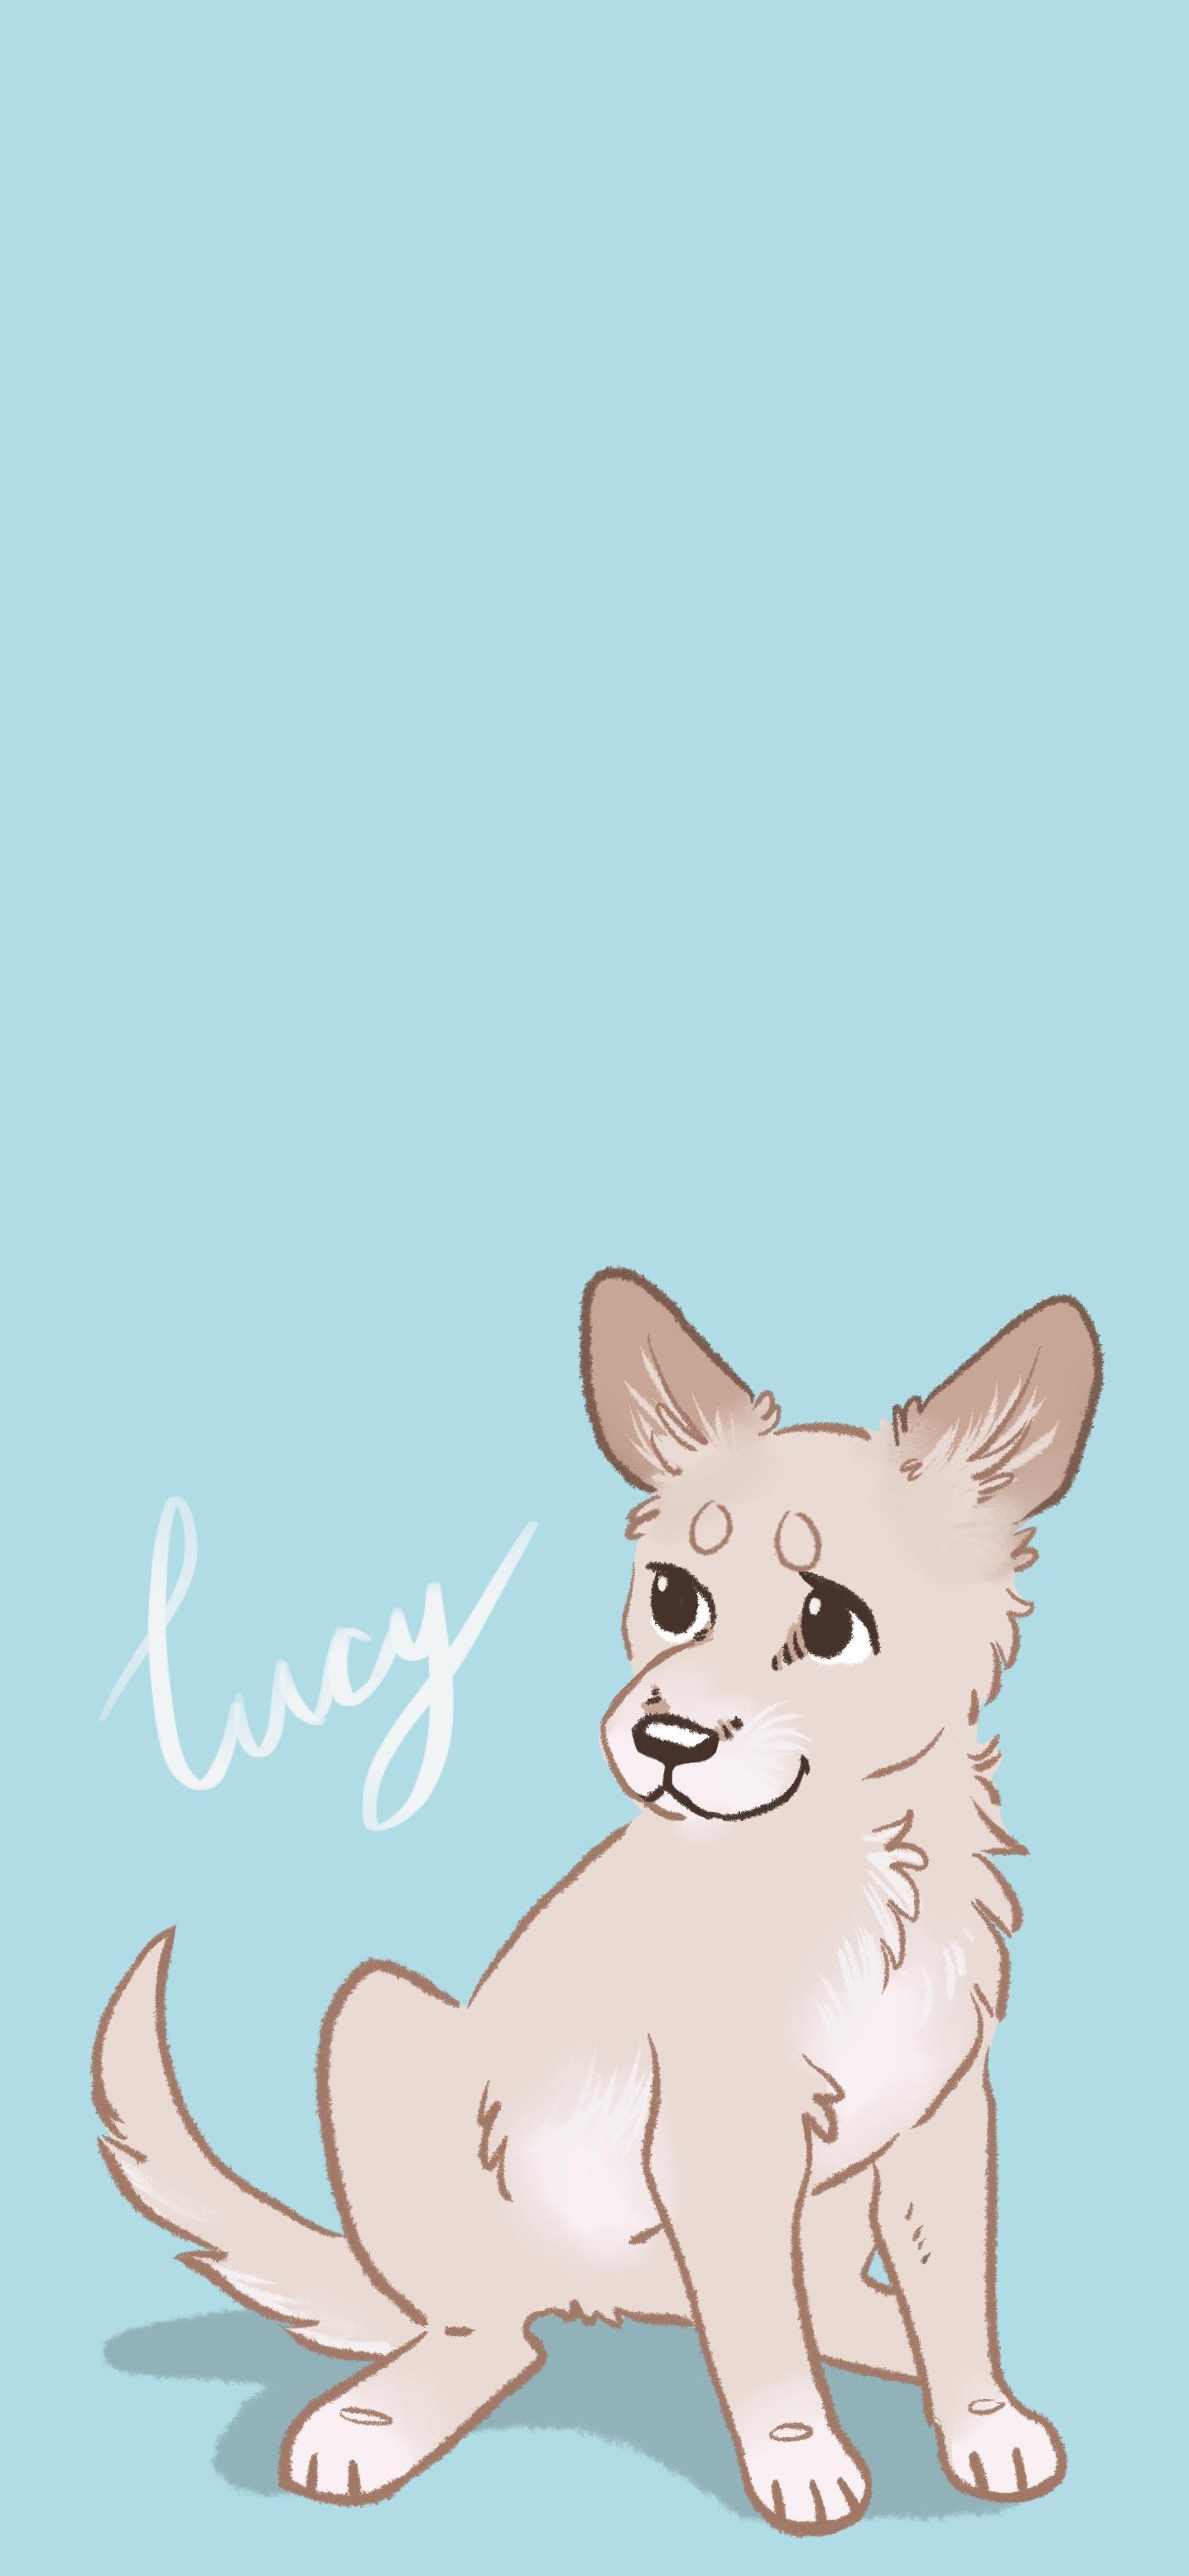 Draw A Cute iPhone Wallpaper Of Your Dog Or Cat By Nancyberumen